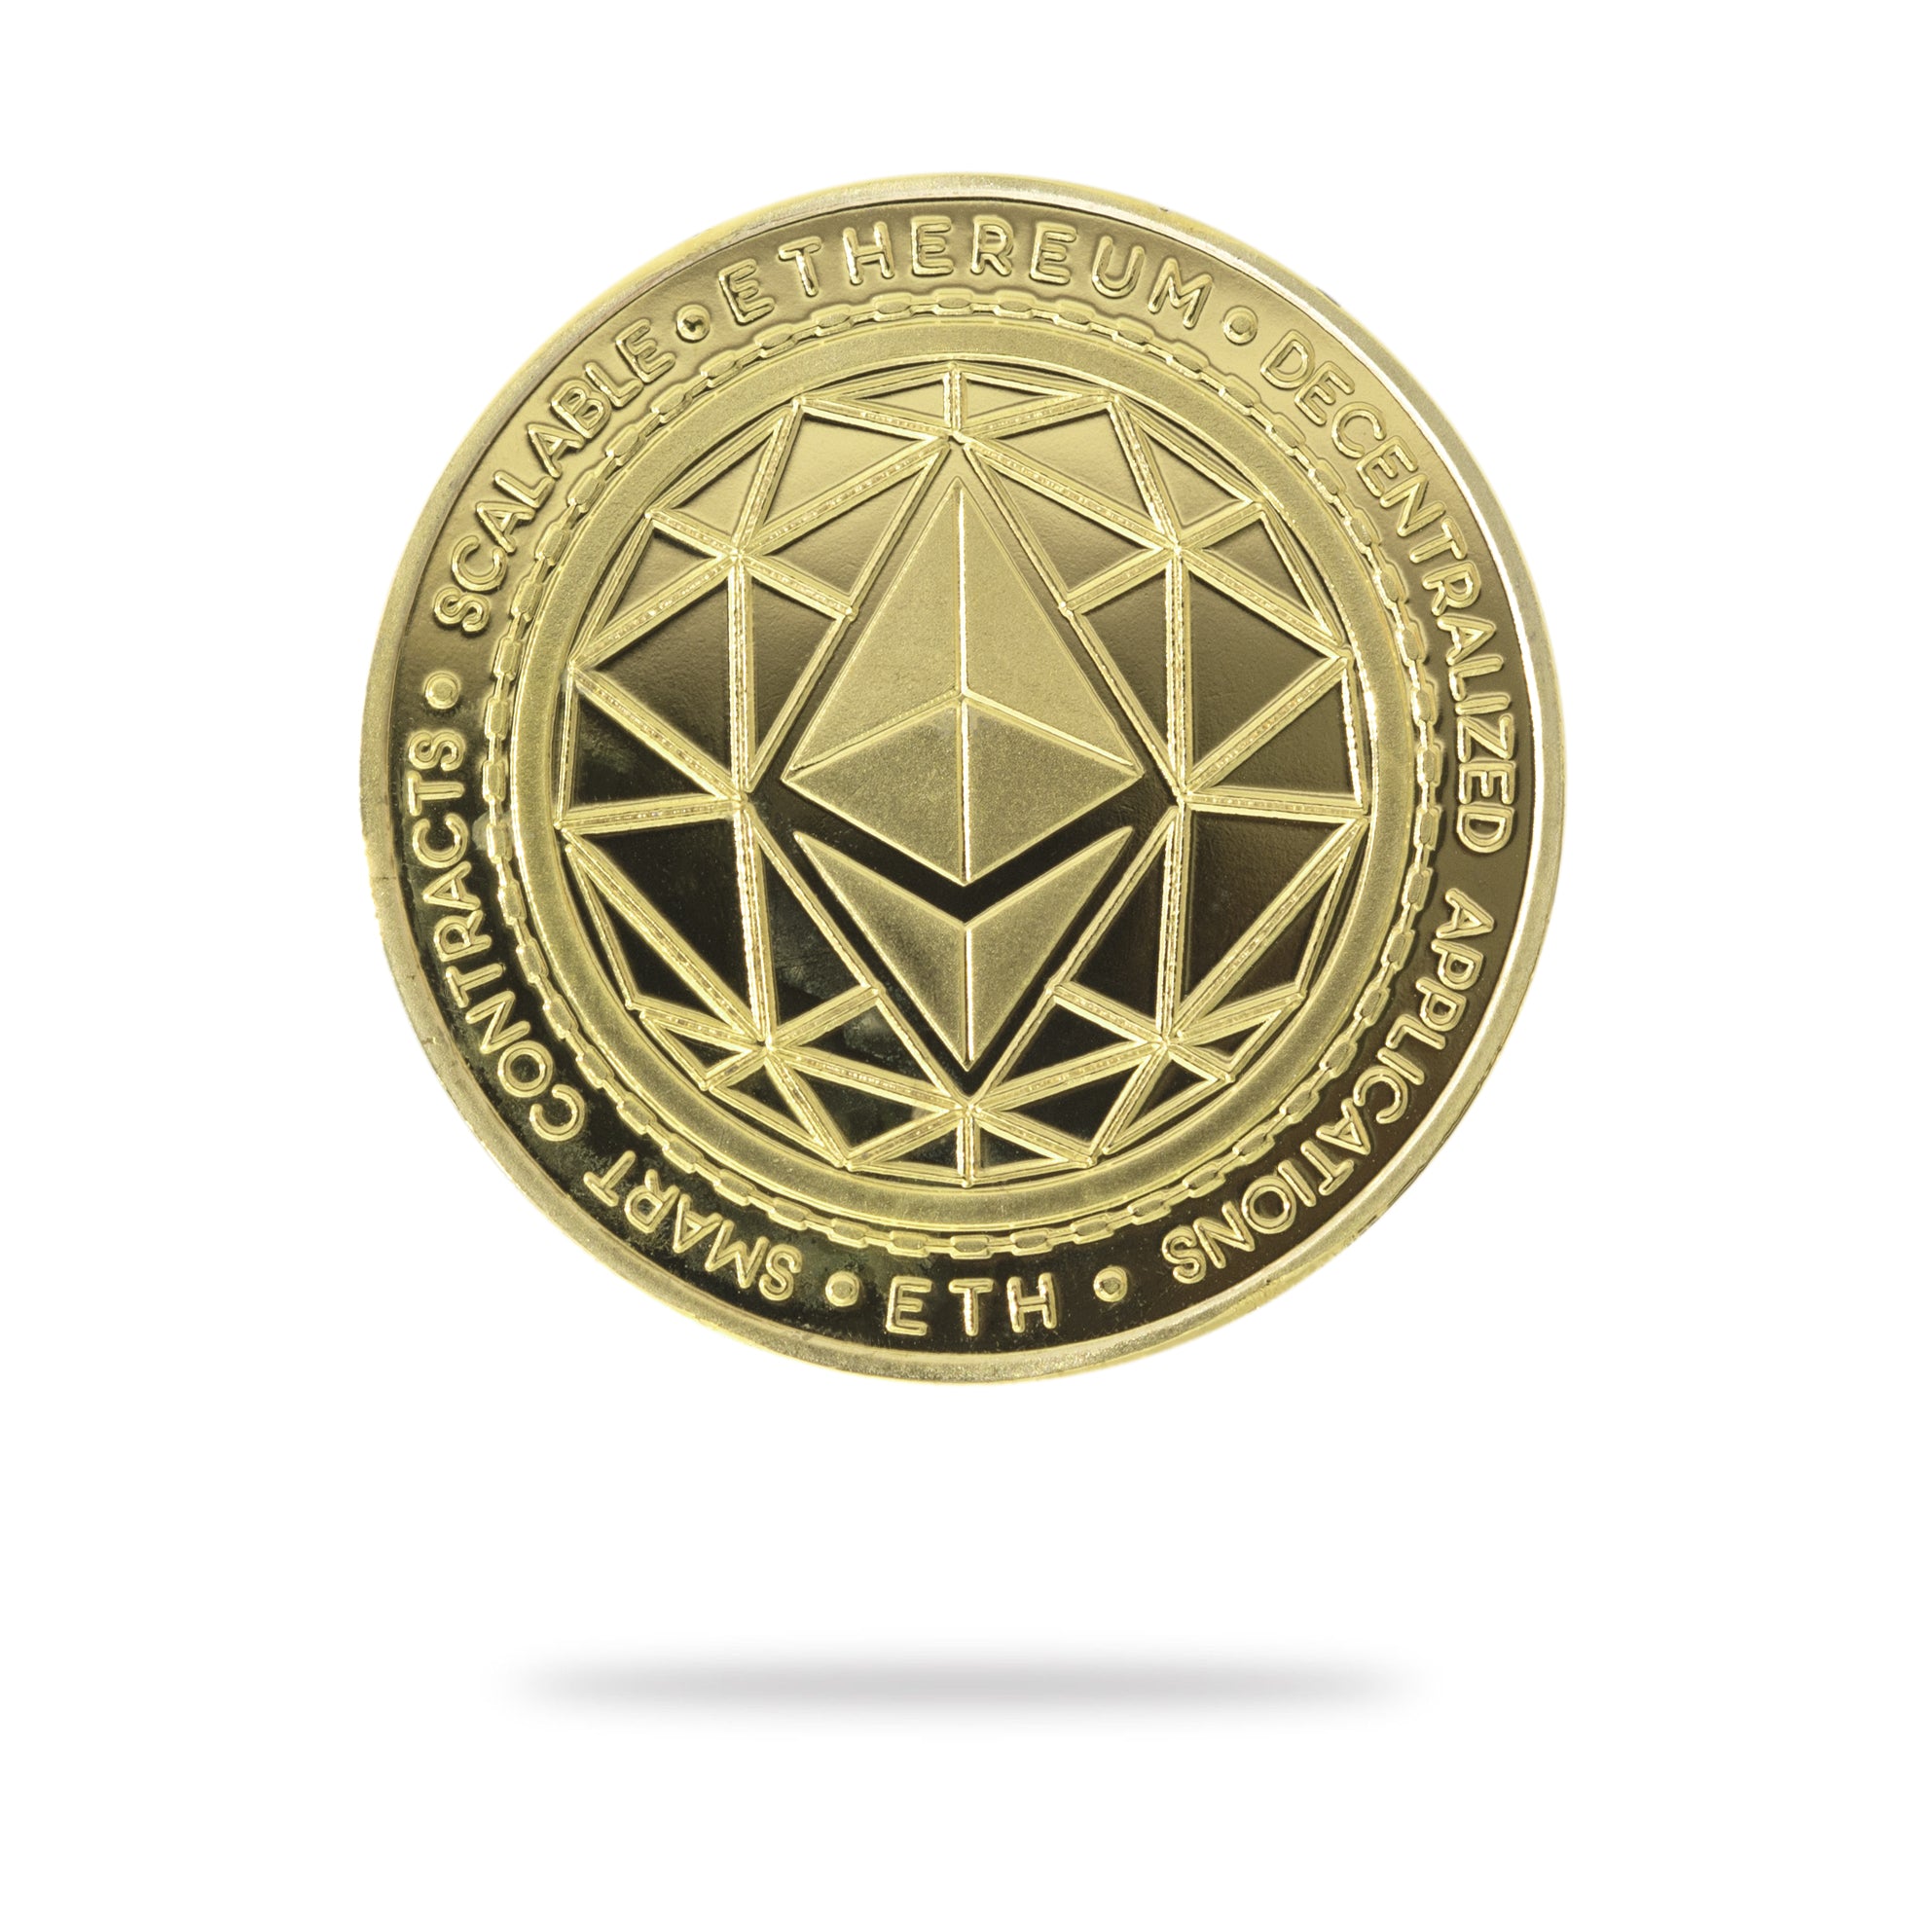 Cryptochips | Ethereum Physical Crypto Coin. Collectable cryptocurrency merch you can hodl